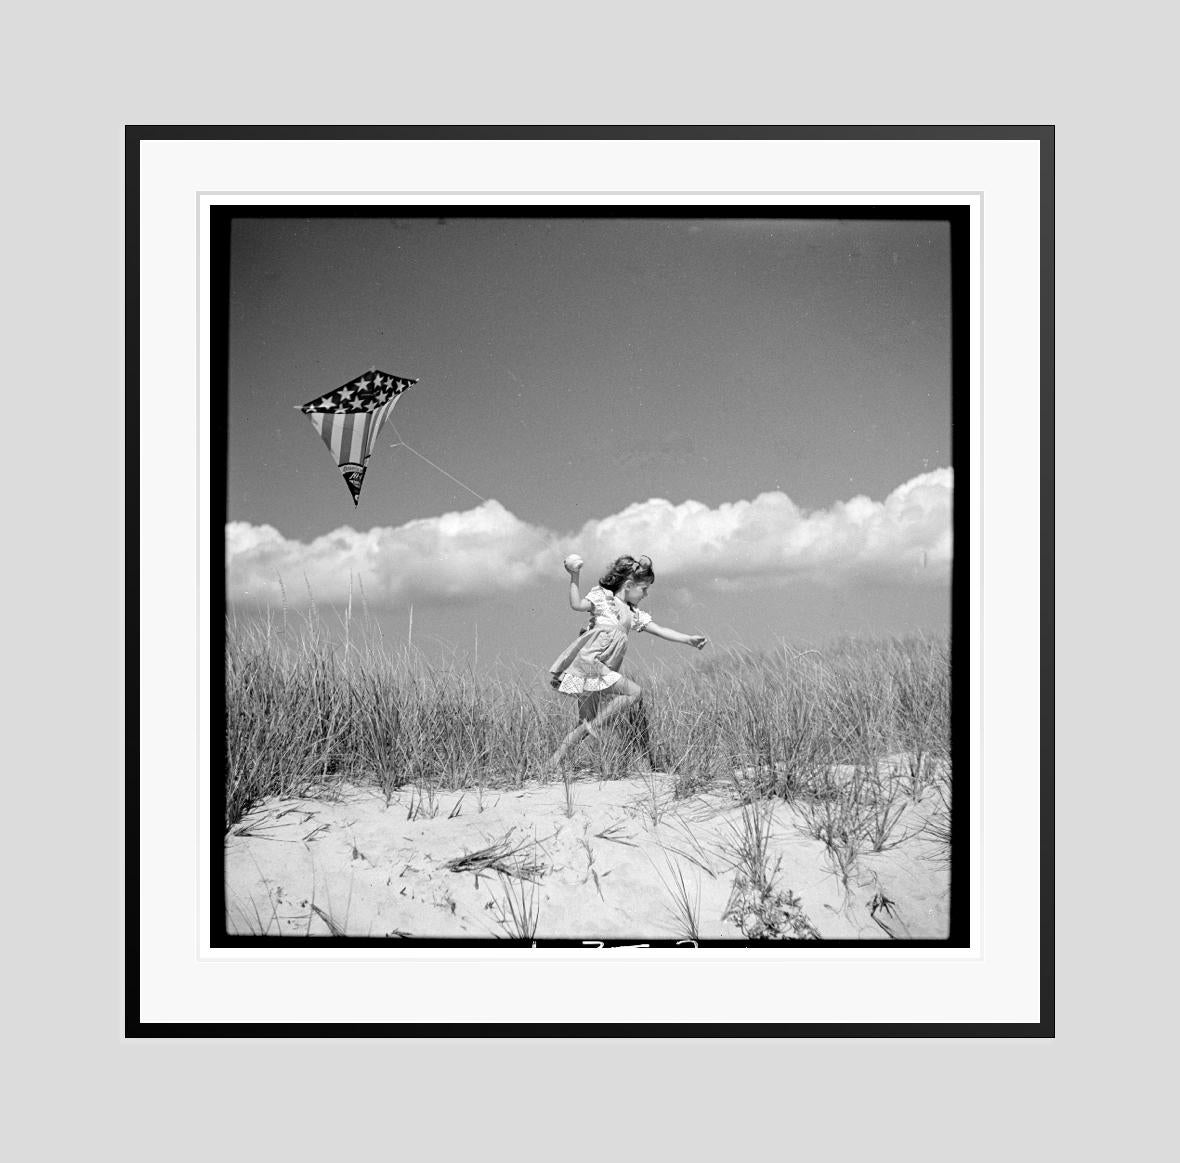 The Wind

1944

Toni Frissell’s daugther Sidney on the beach as the Wind from A Child’s Garden of Verses, Southampton, Long Island, USA, 1944.

by Toni Frissell

60 x 60